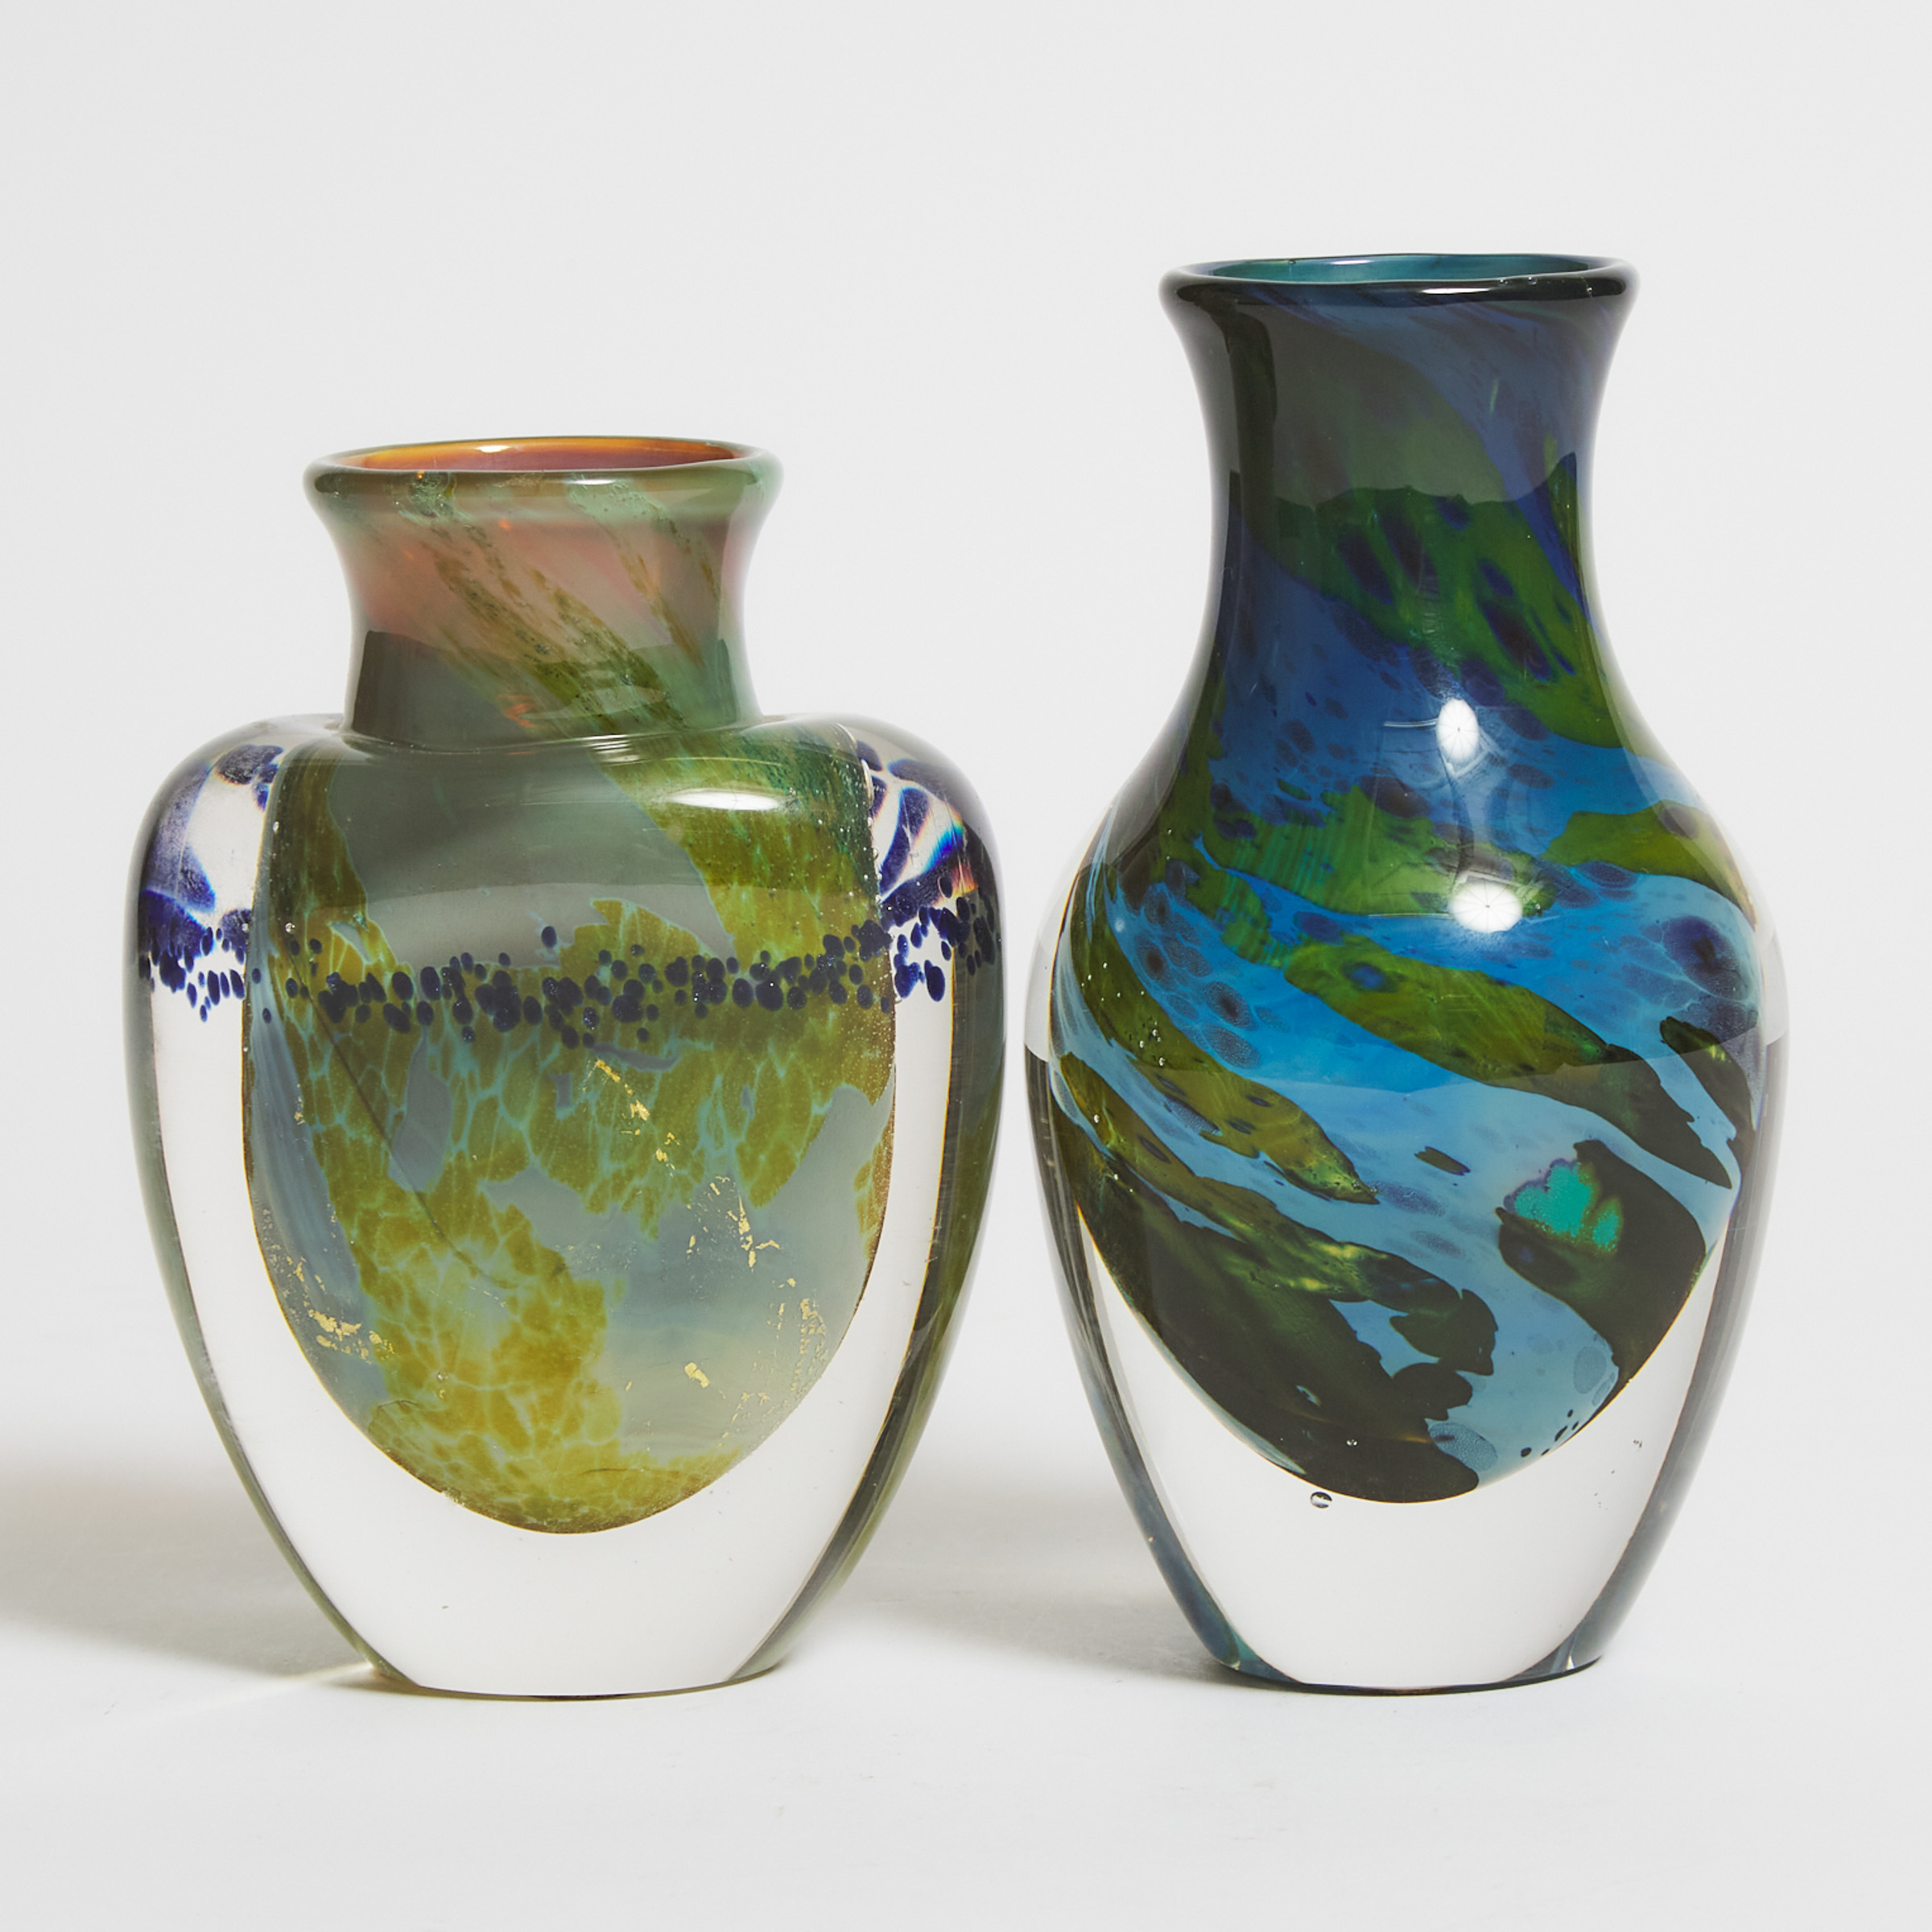 Two Toan Klein Studio Glass Vases, dated 1987 and 1988